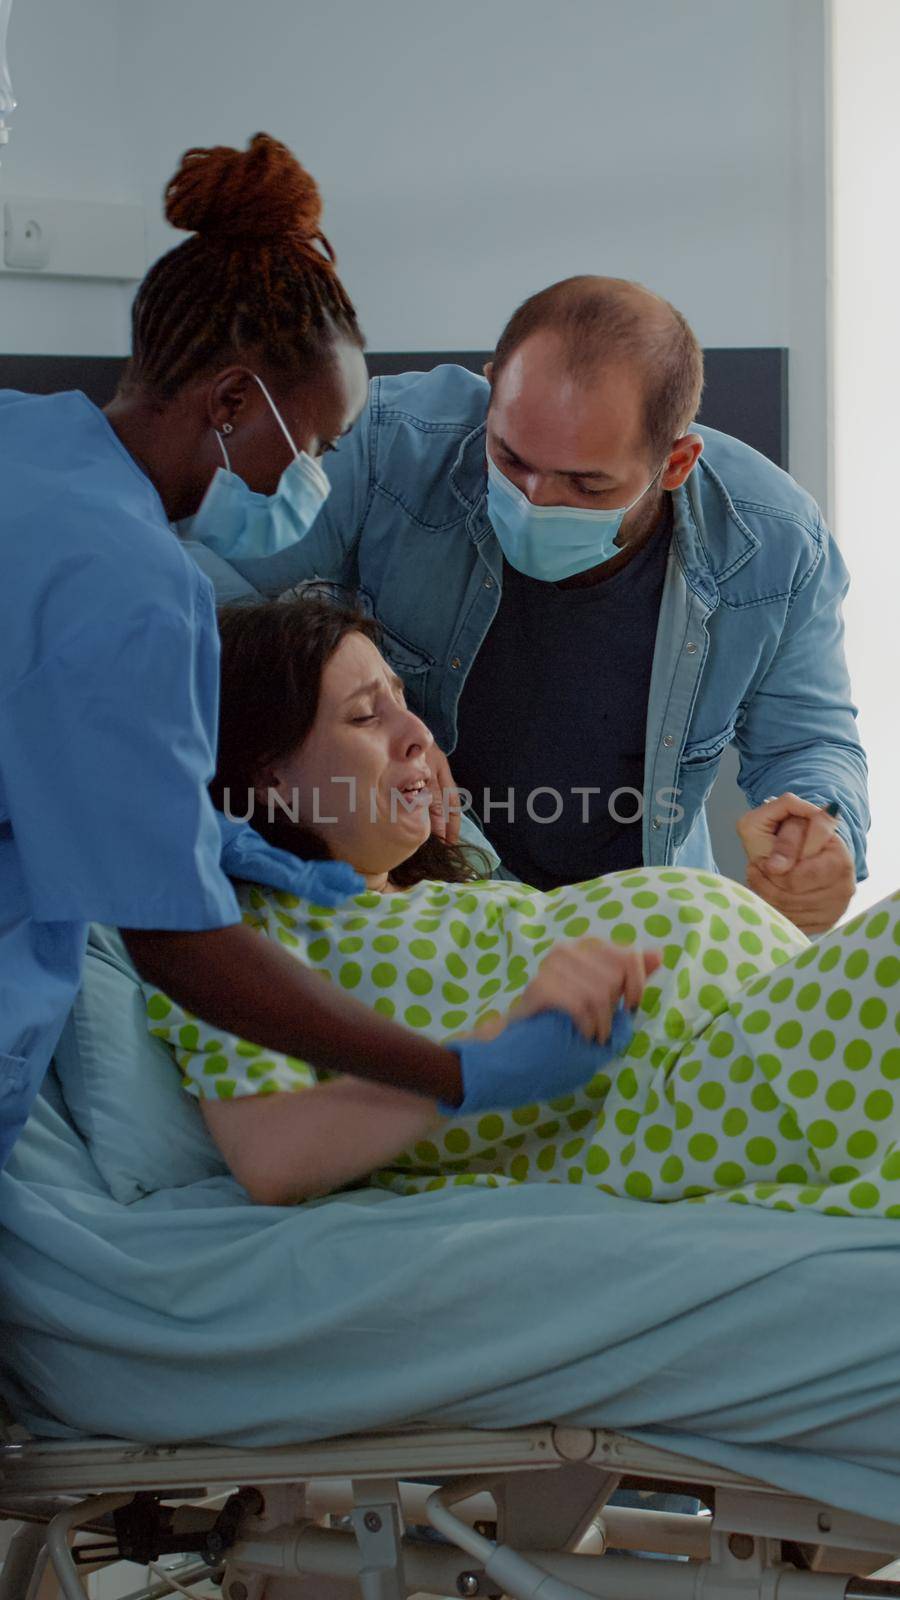 Obstetrics doctor and african american nurse assisting birth in hospital ward. Pregnant woman in labor with painful contractions pushing for baby. Young husband sitting for support